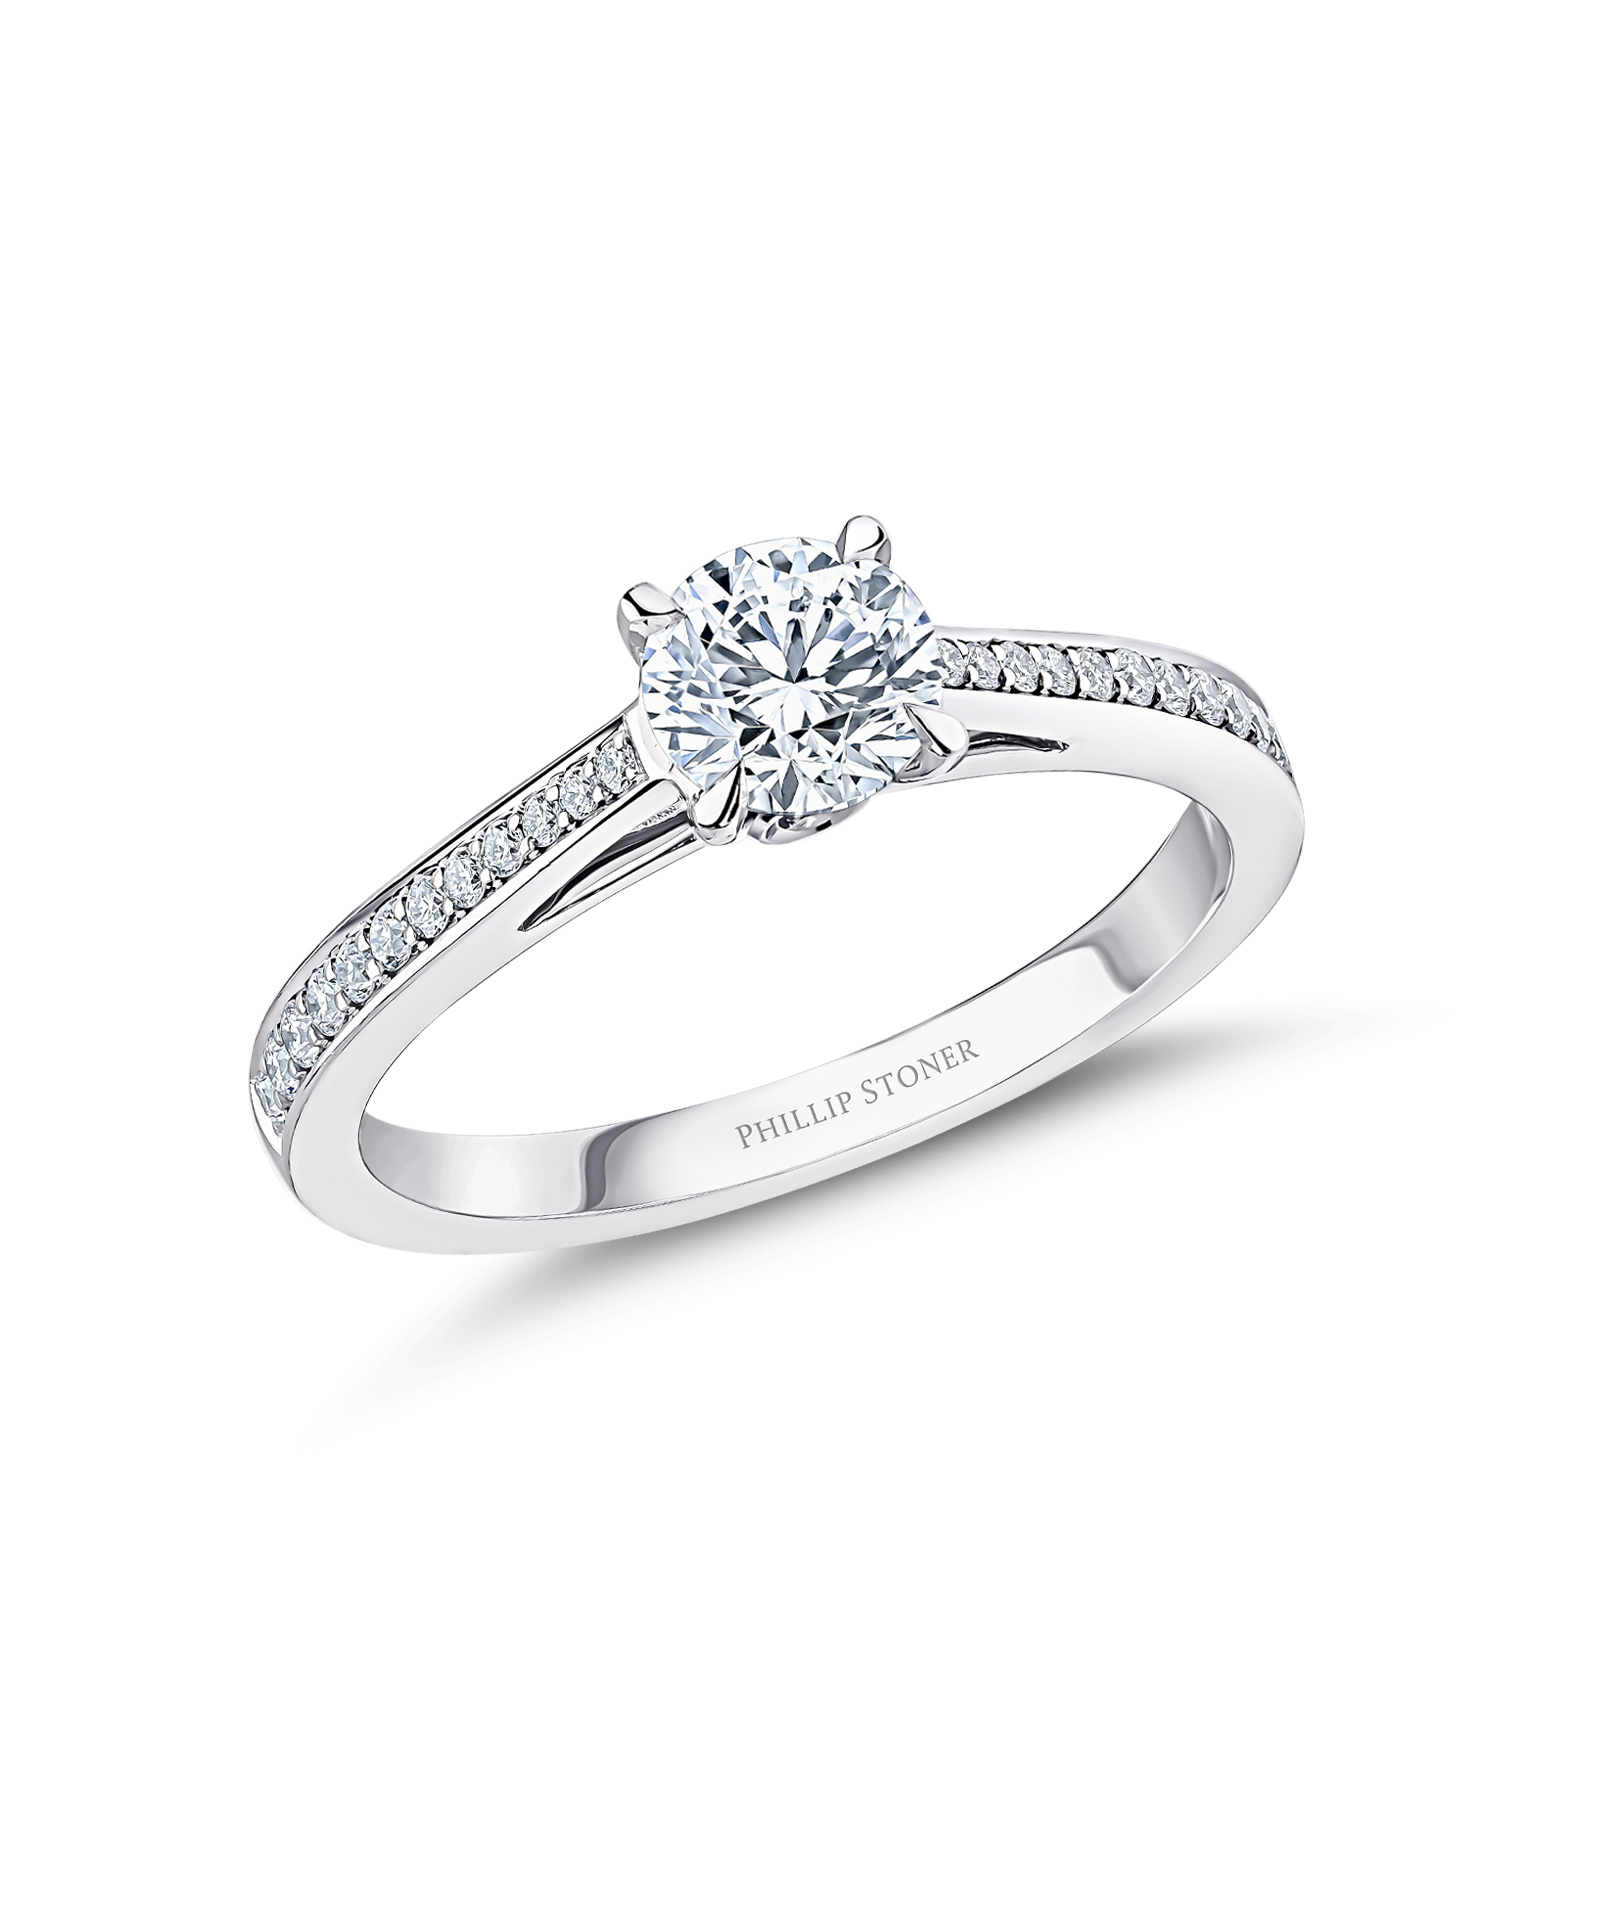 0.70ct Round Brilliant Diamond Solitaire Ring with Pavé Shoulders - Phillip Stoner The Jeweller